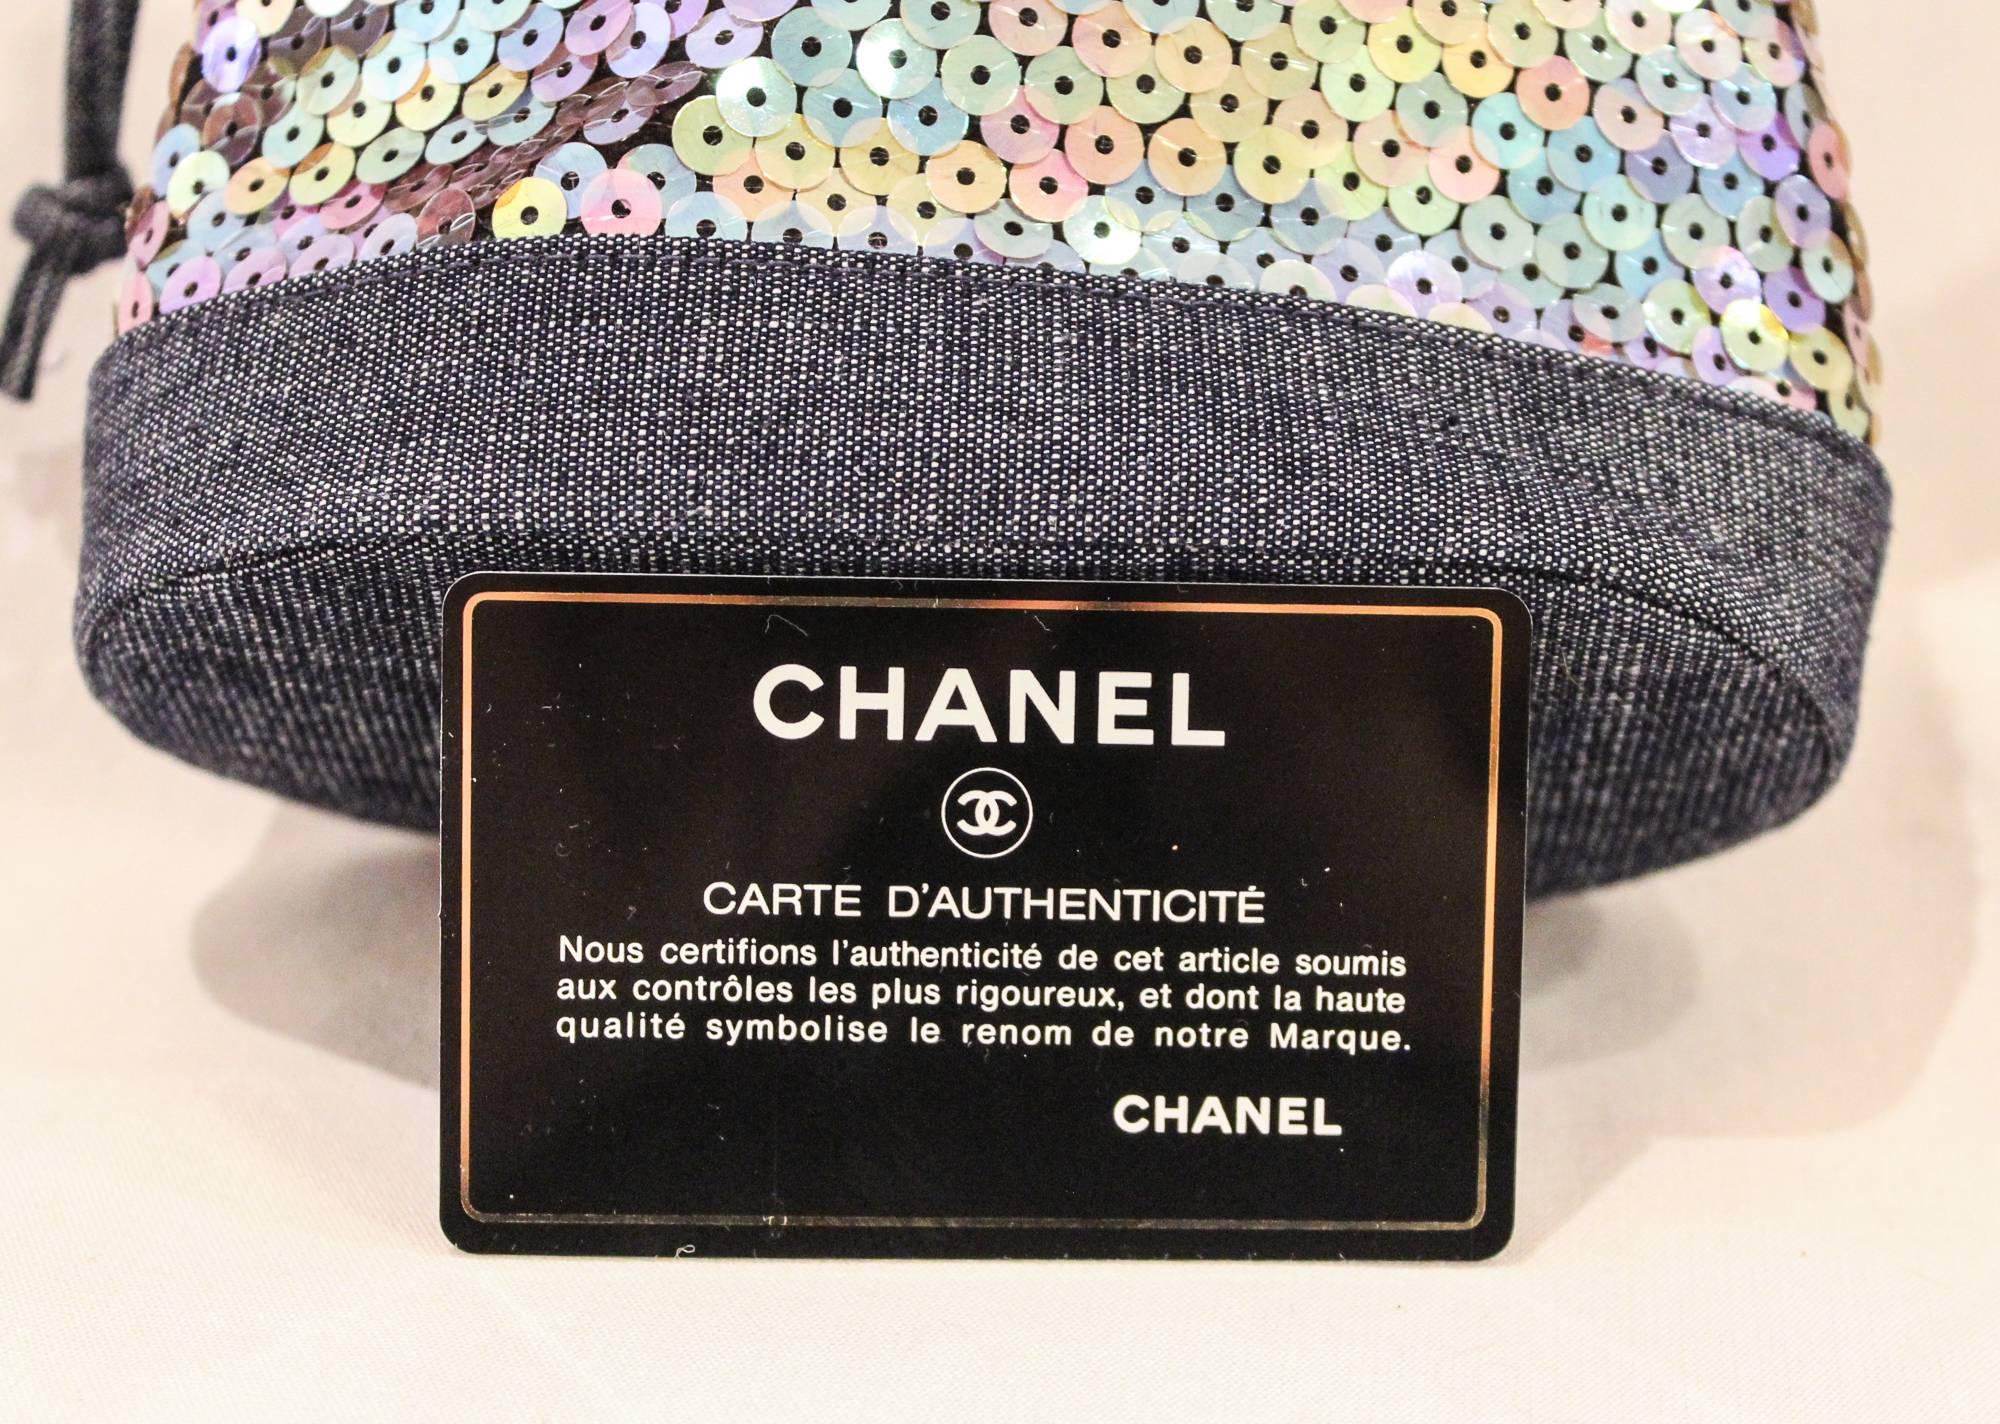 Chanel Vintage Denim Sequin Mini Bucket Bag In Excellent Condition For Sale In Palm Beach, FL